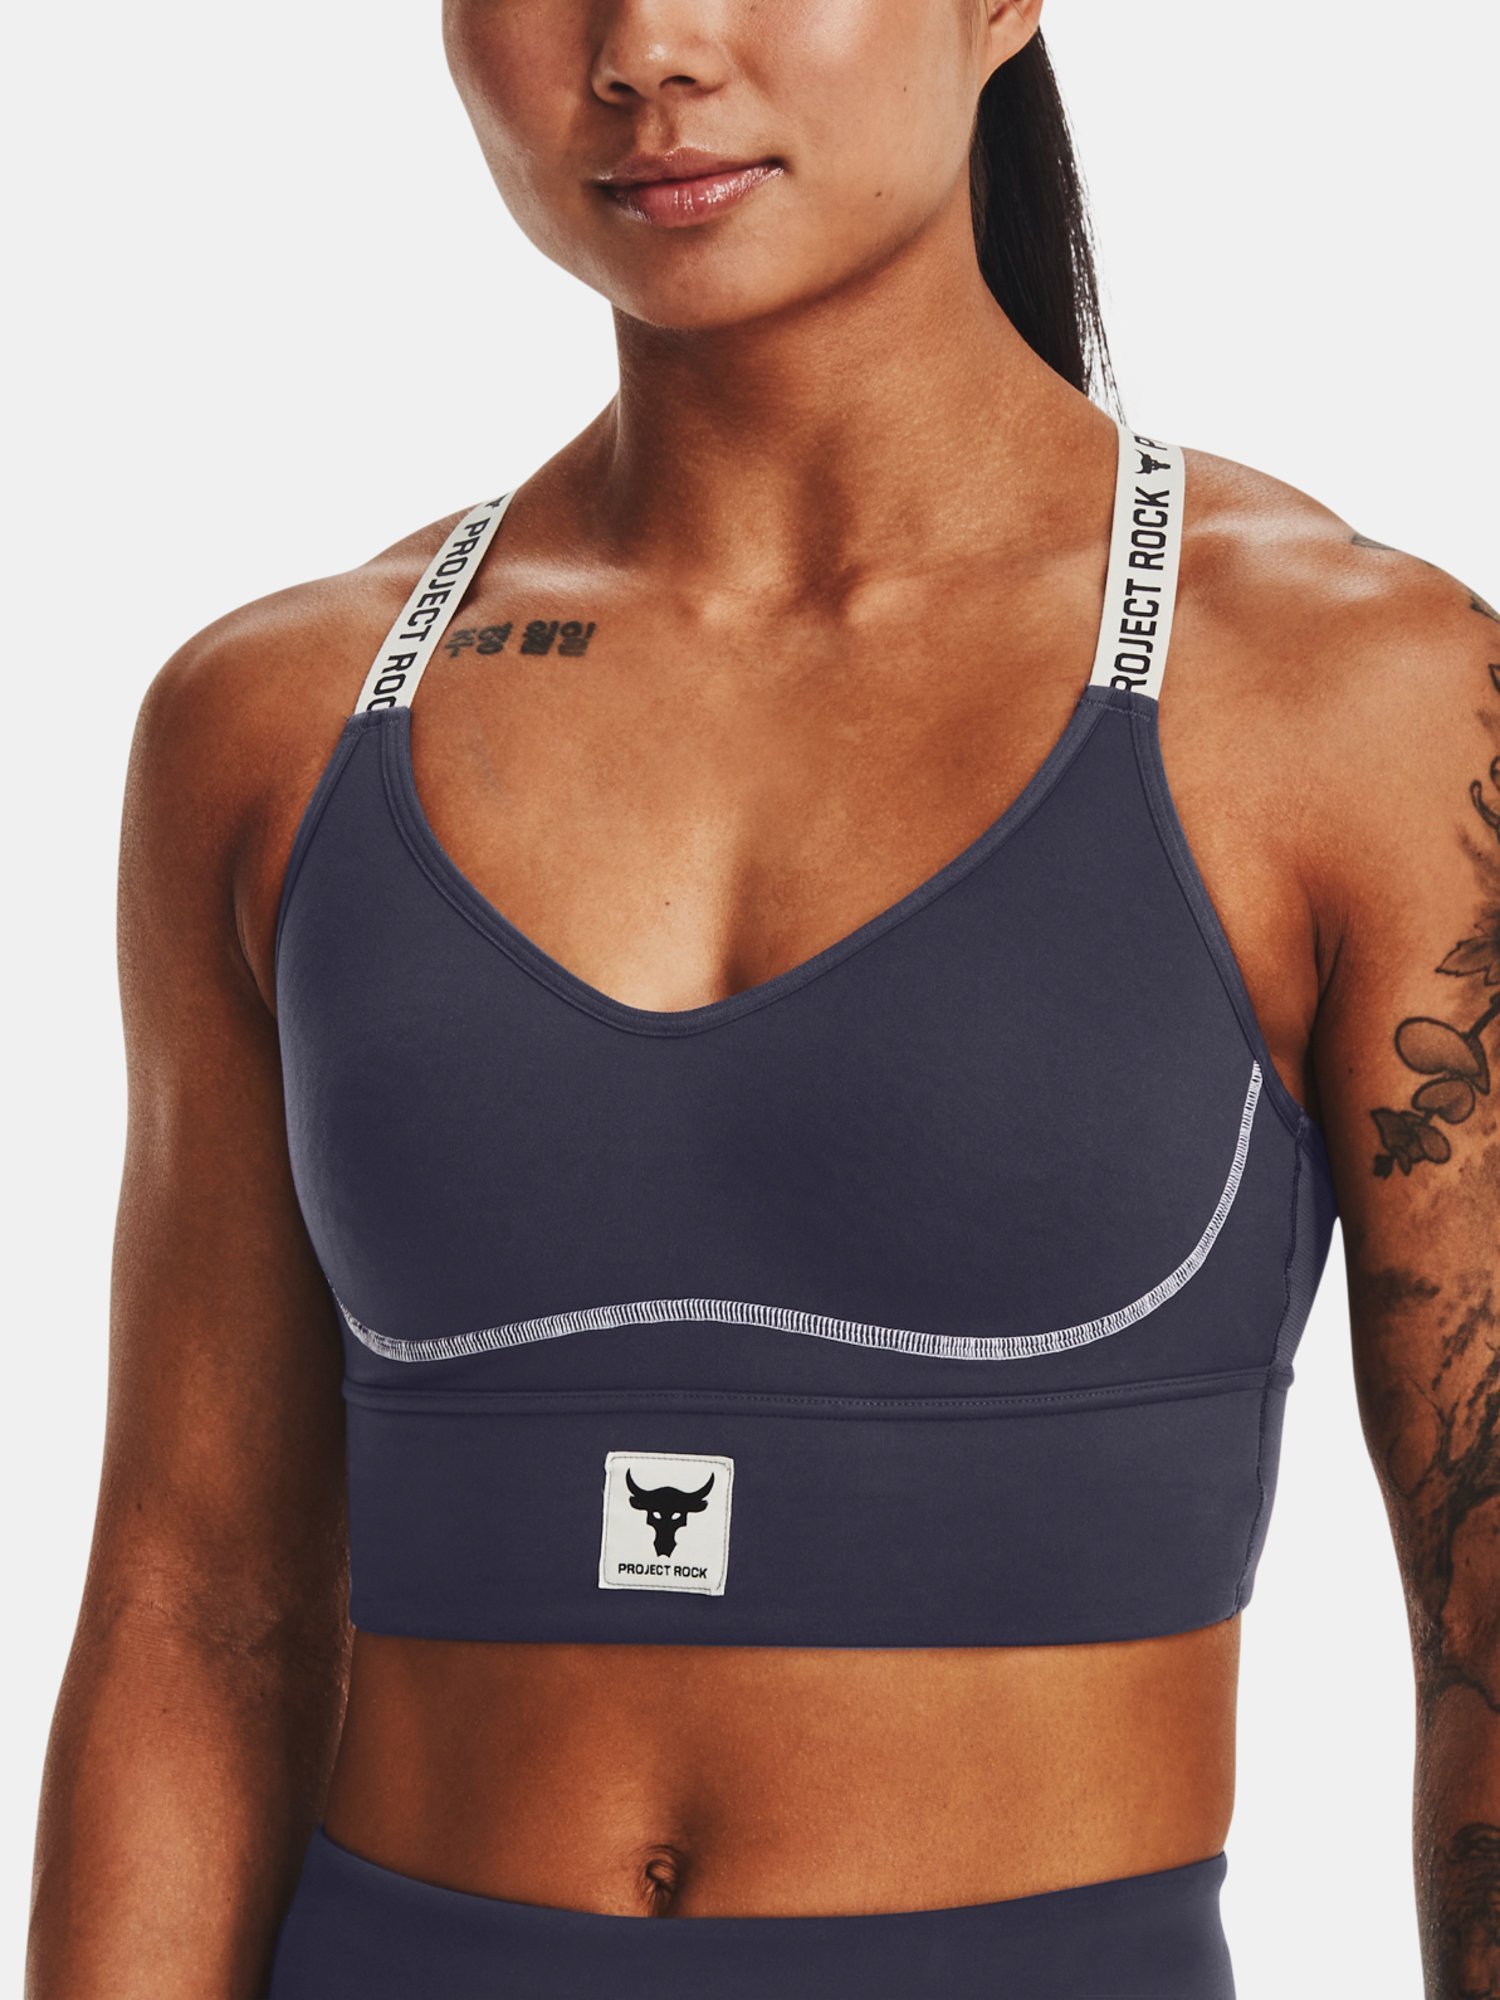 Under Armour Pjt Rock Infty Mid Bra-GRY